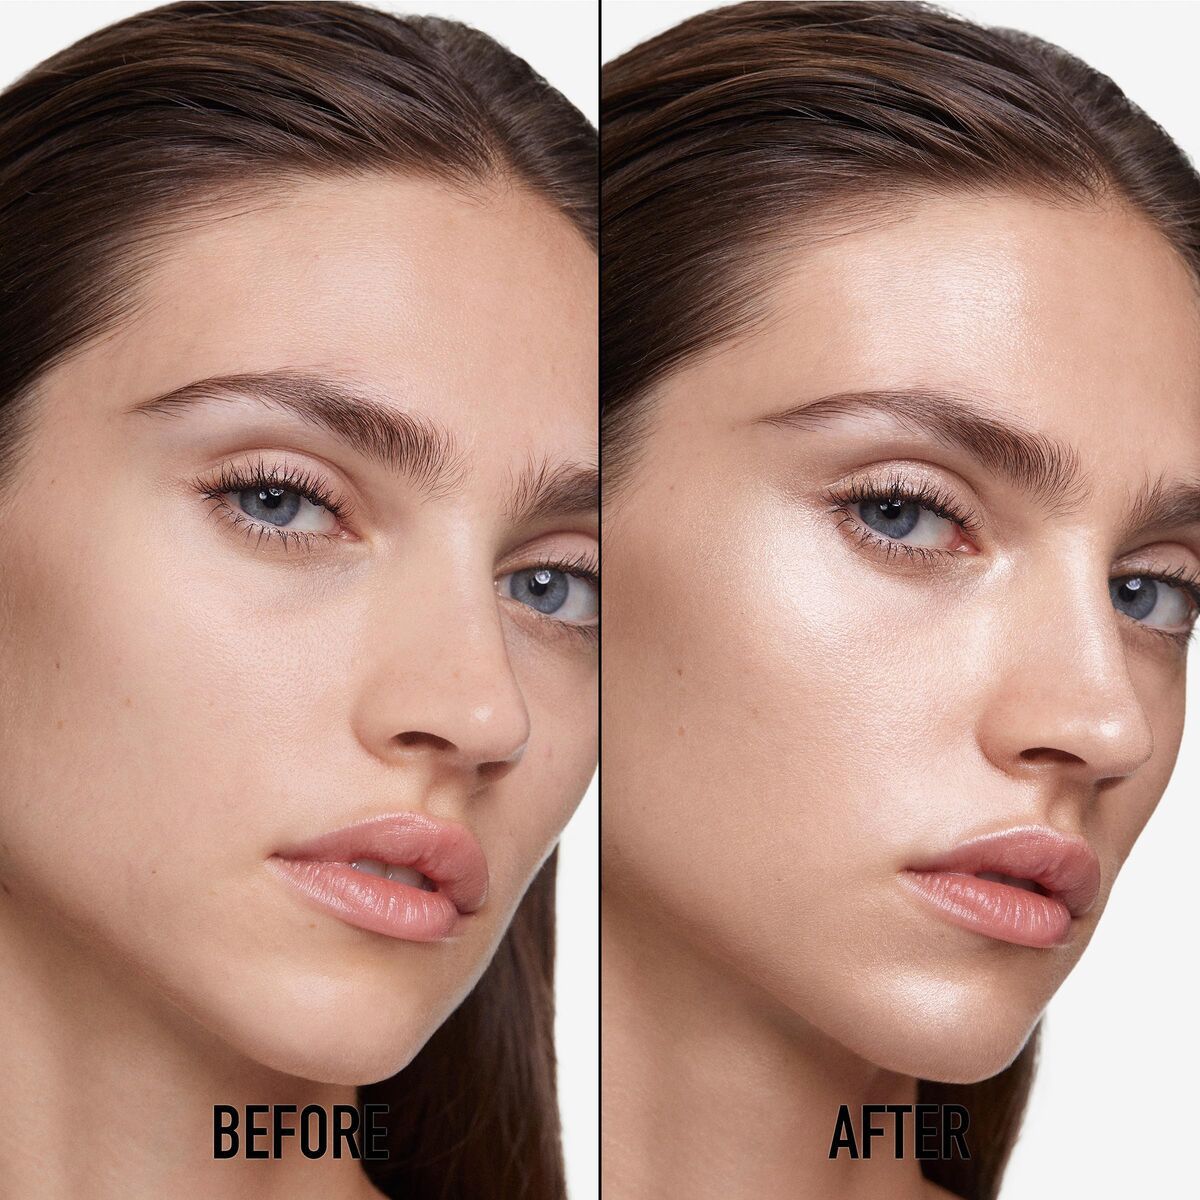 Image of a before and after using DIOR Forever Glow Star Filter